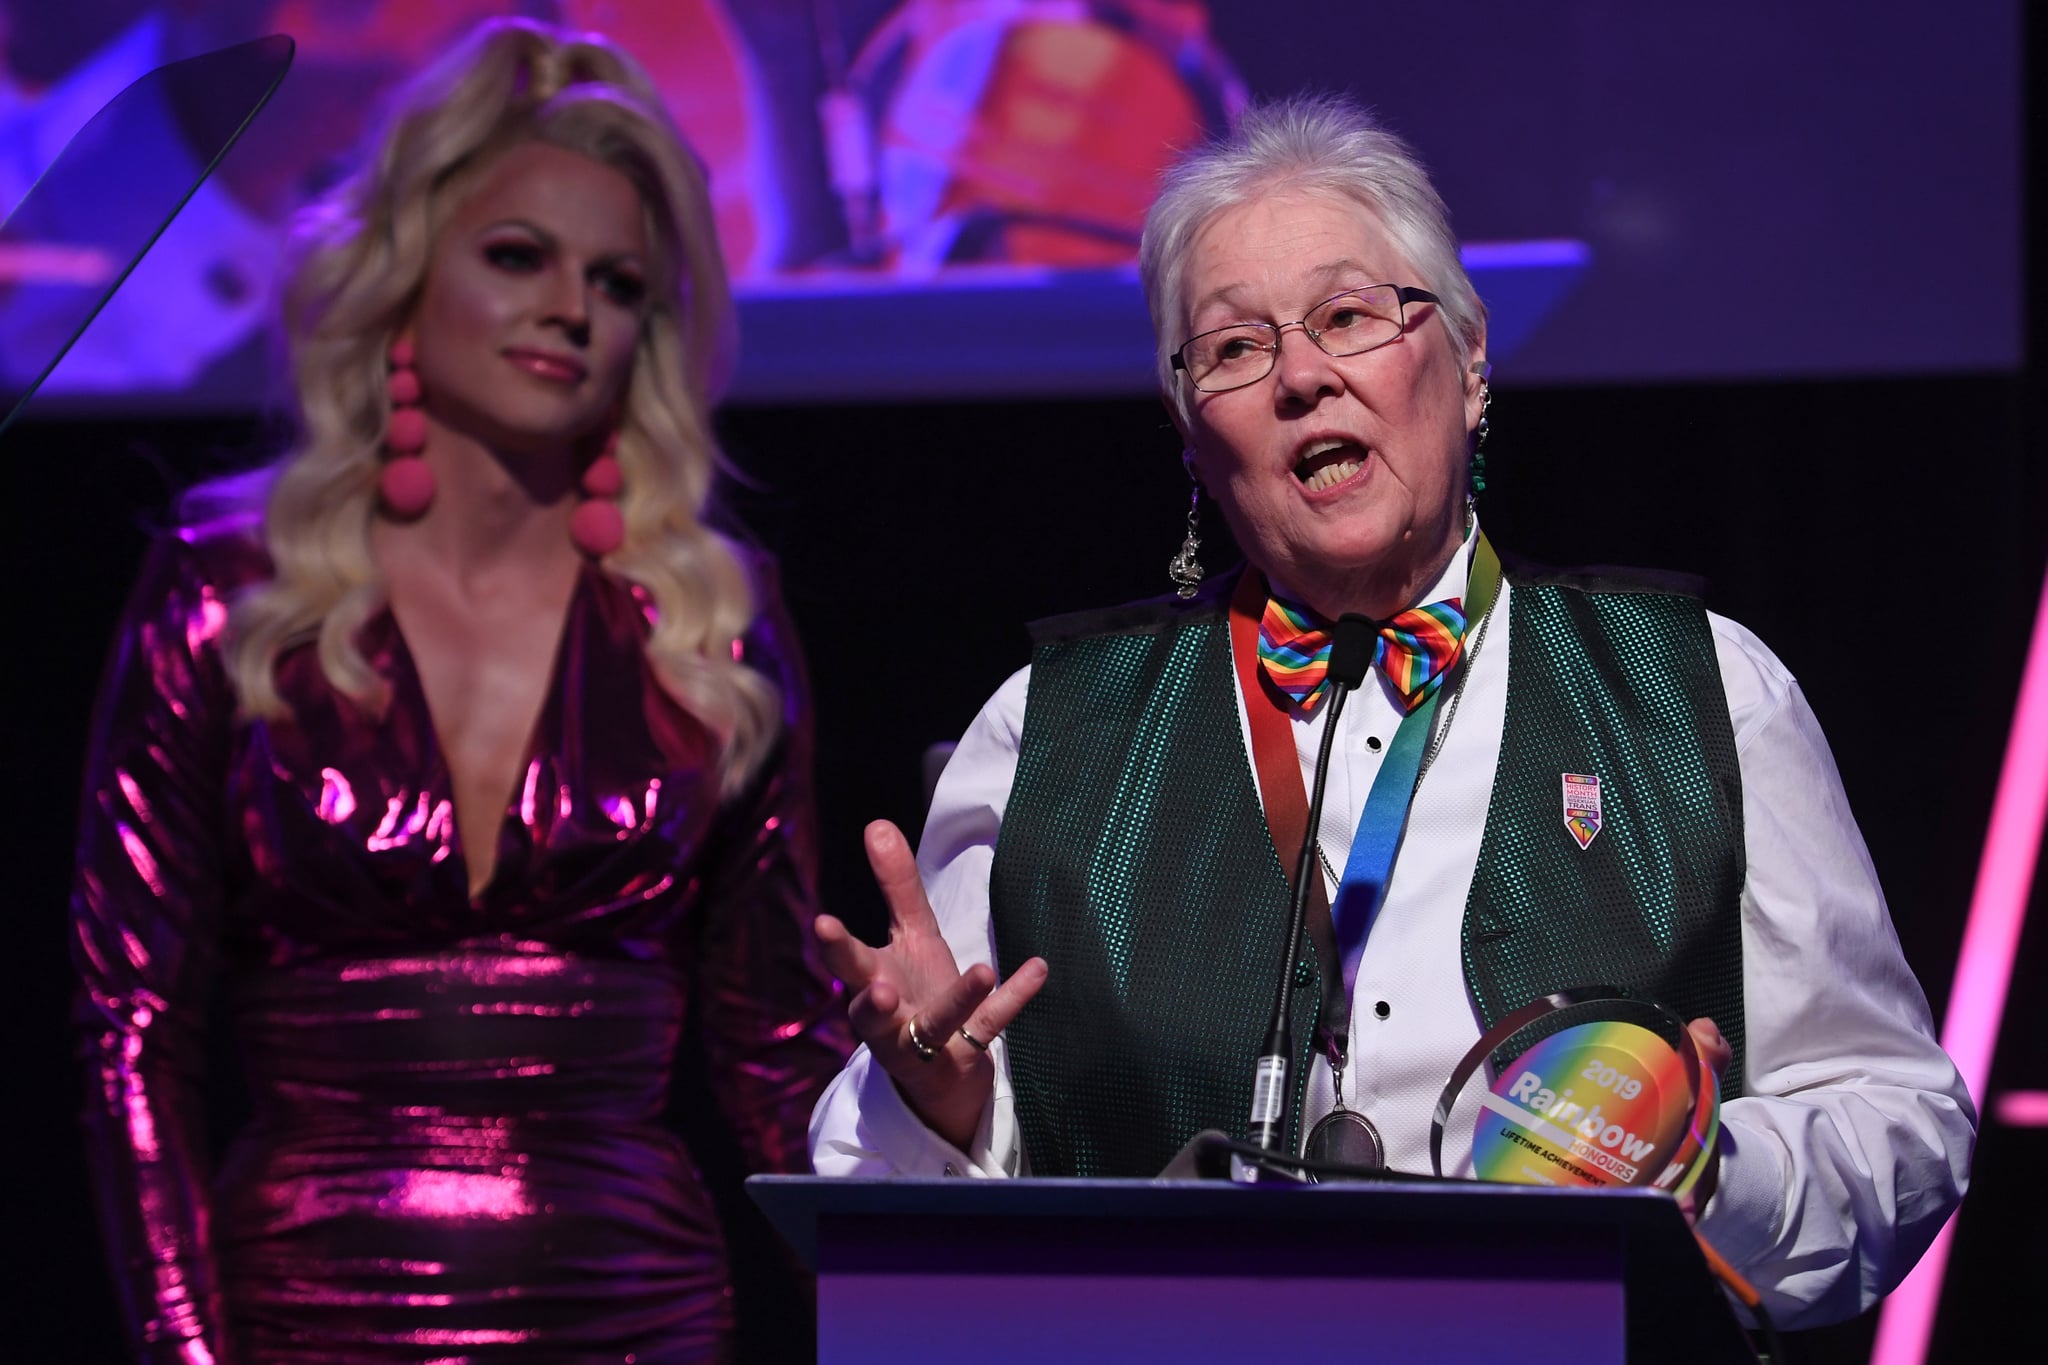 LONDON, ENGLAND - DECEMBER 04: Sue Sanders accepts the award for 'Lifetime Achievement' at the Rainbow Honours 2019 at Madame Tussauds on December 04, 2019 in London, England. (Photo by Stuart C. Wilson/Getty Images)